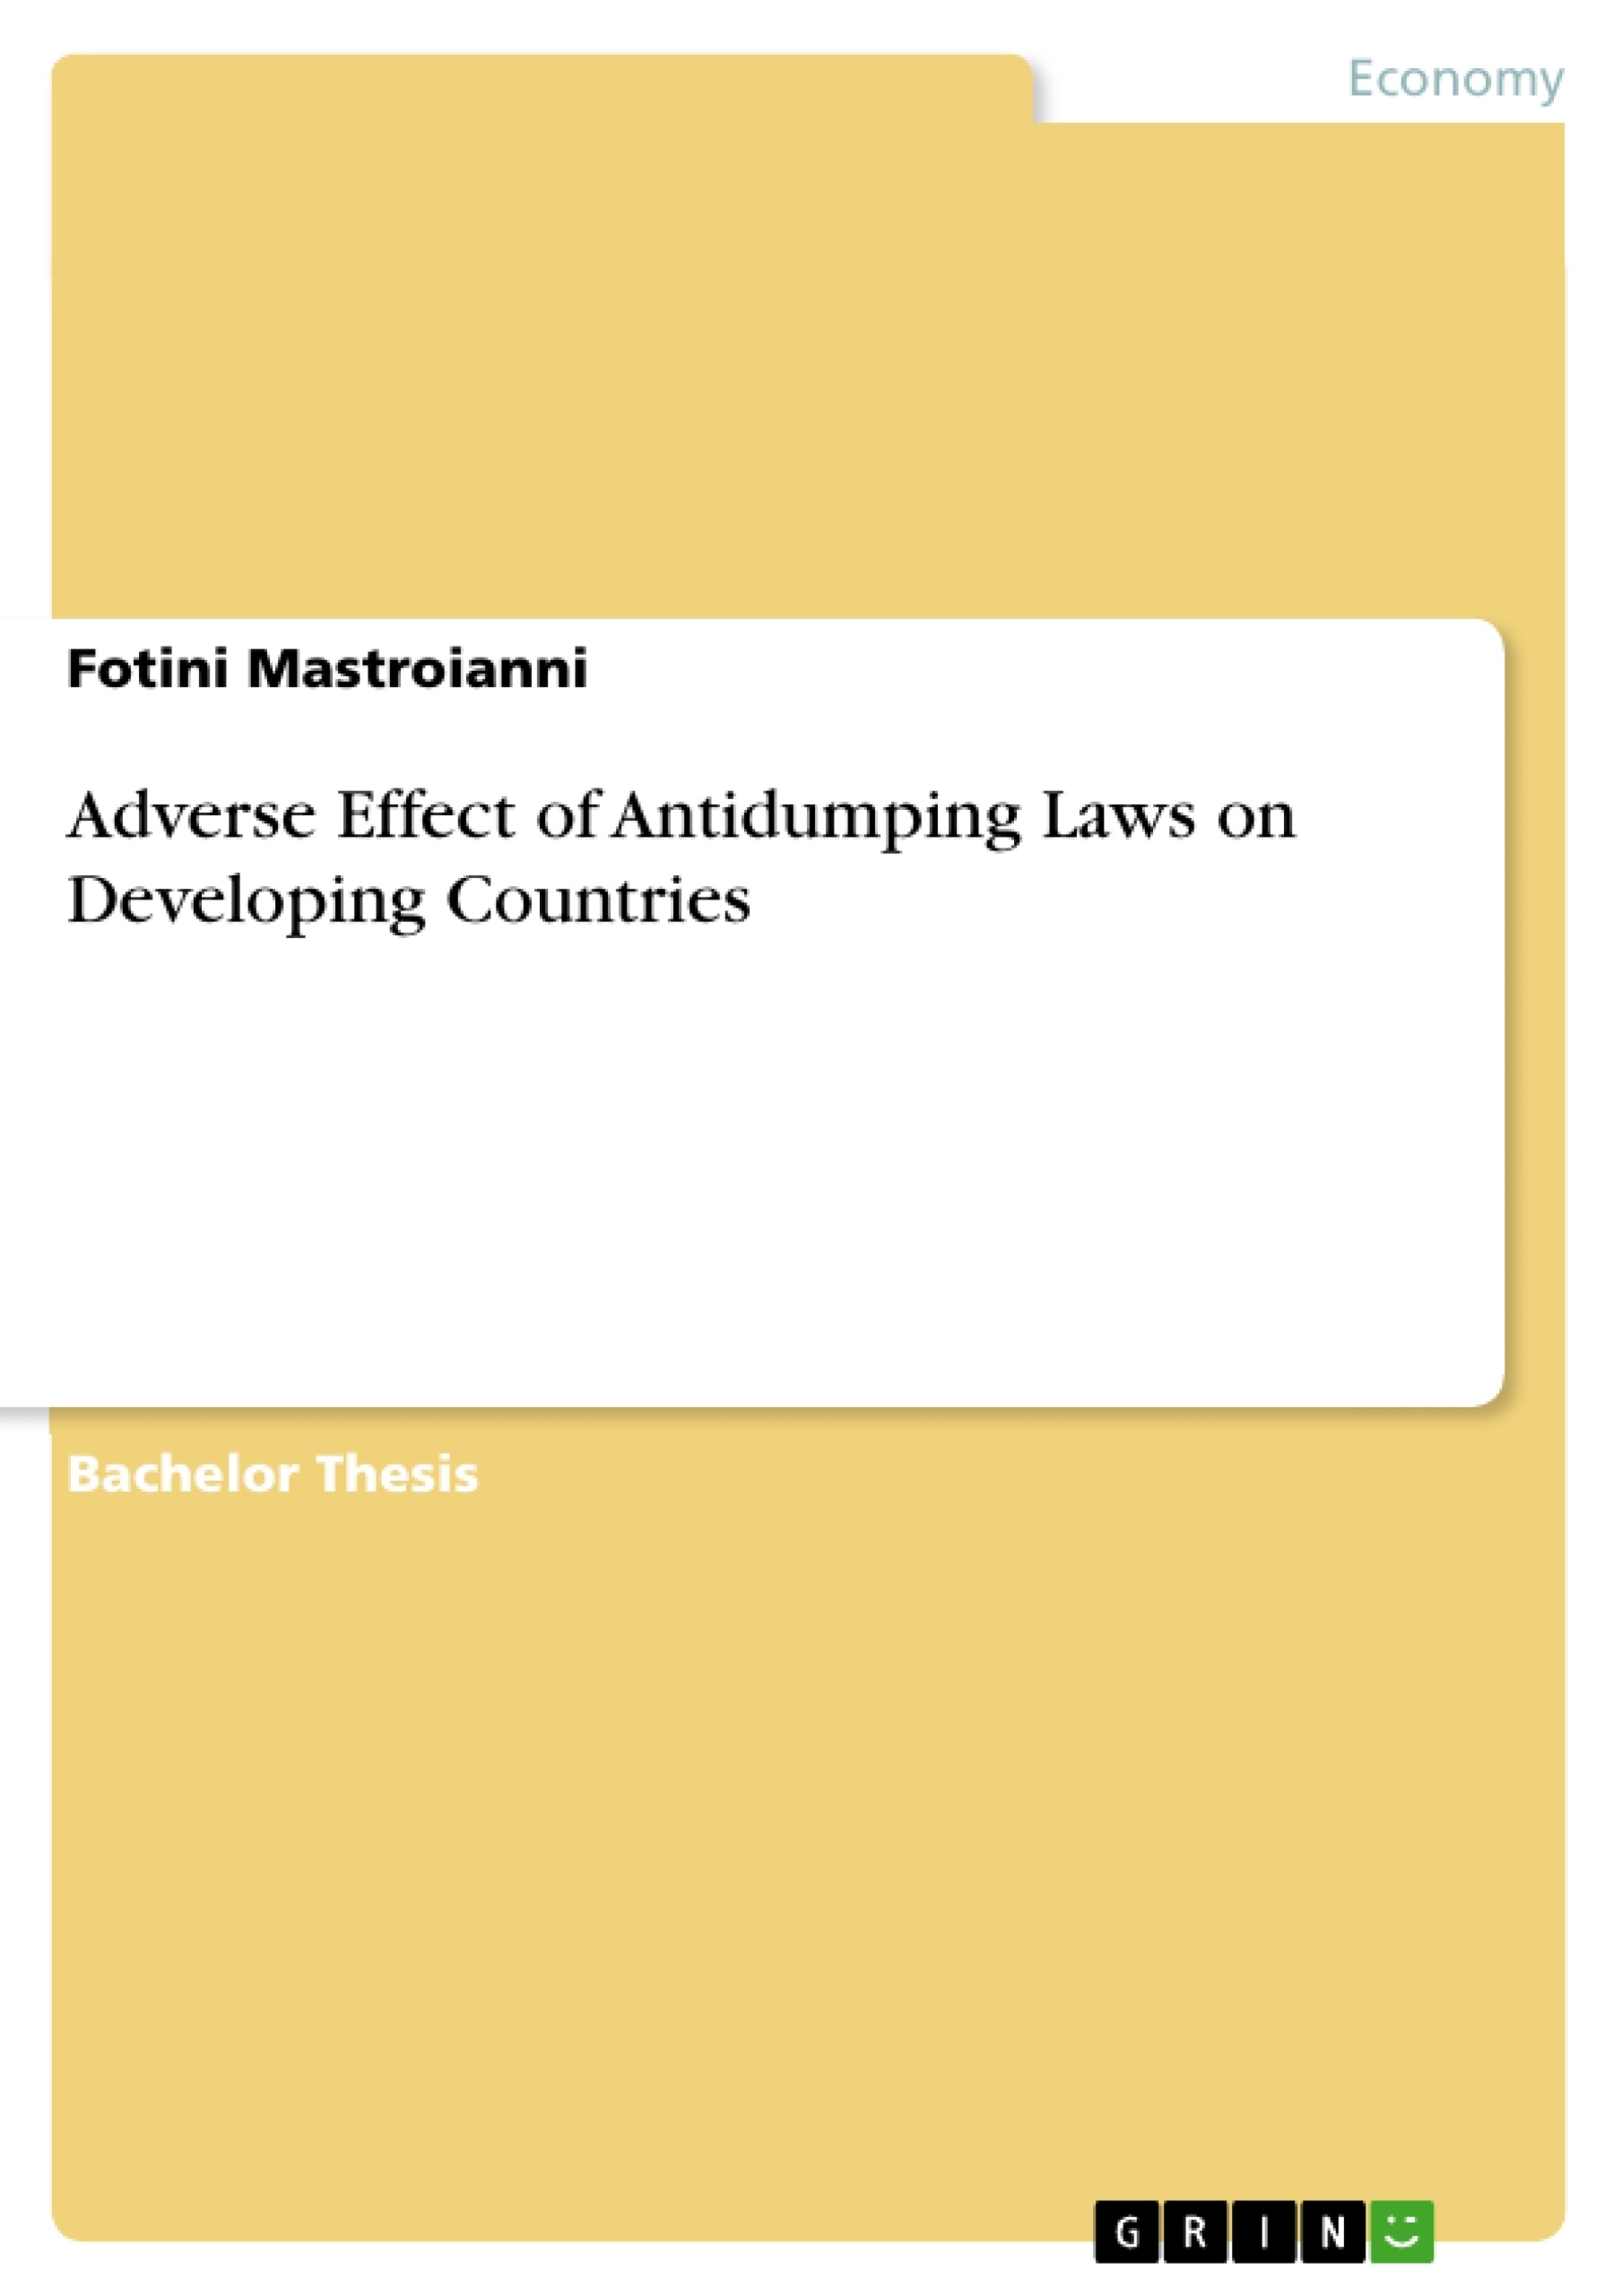 Title: Adverse Effect of Antidumping Laws on Developing Countries